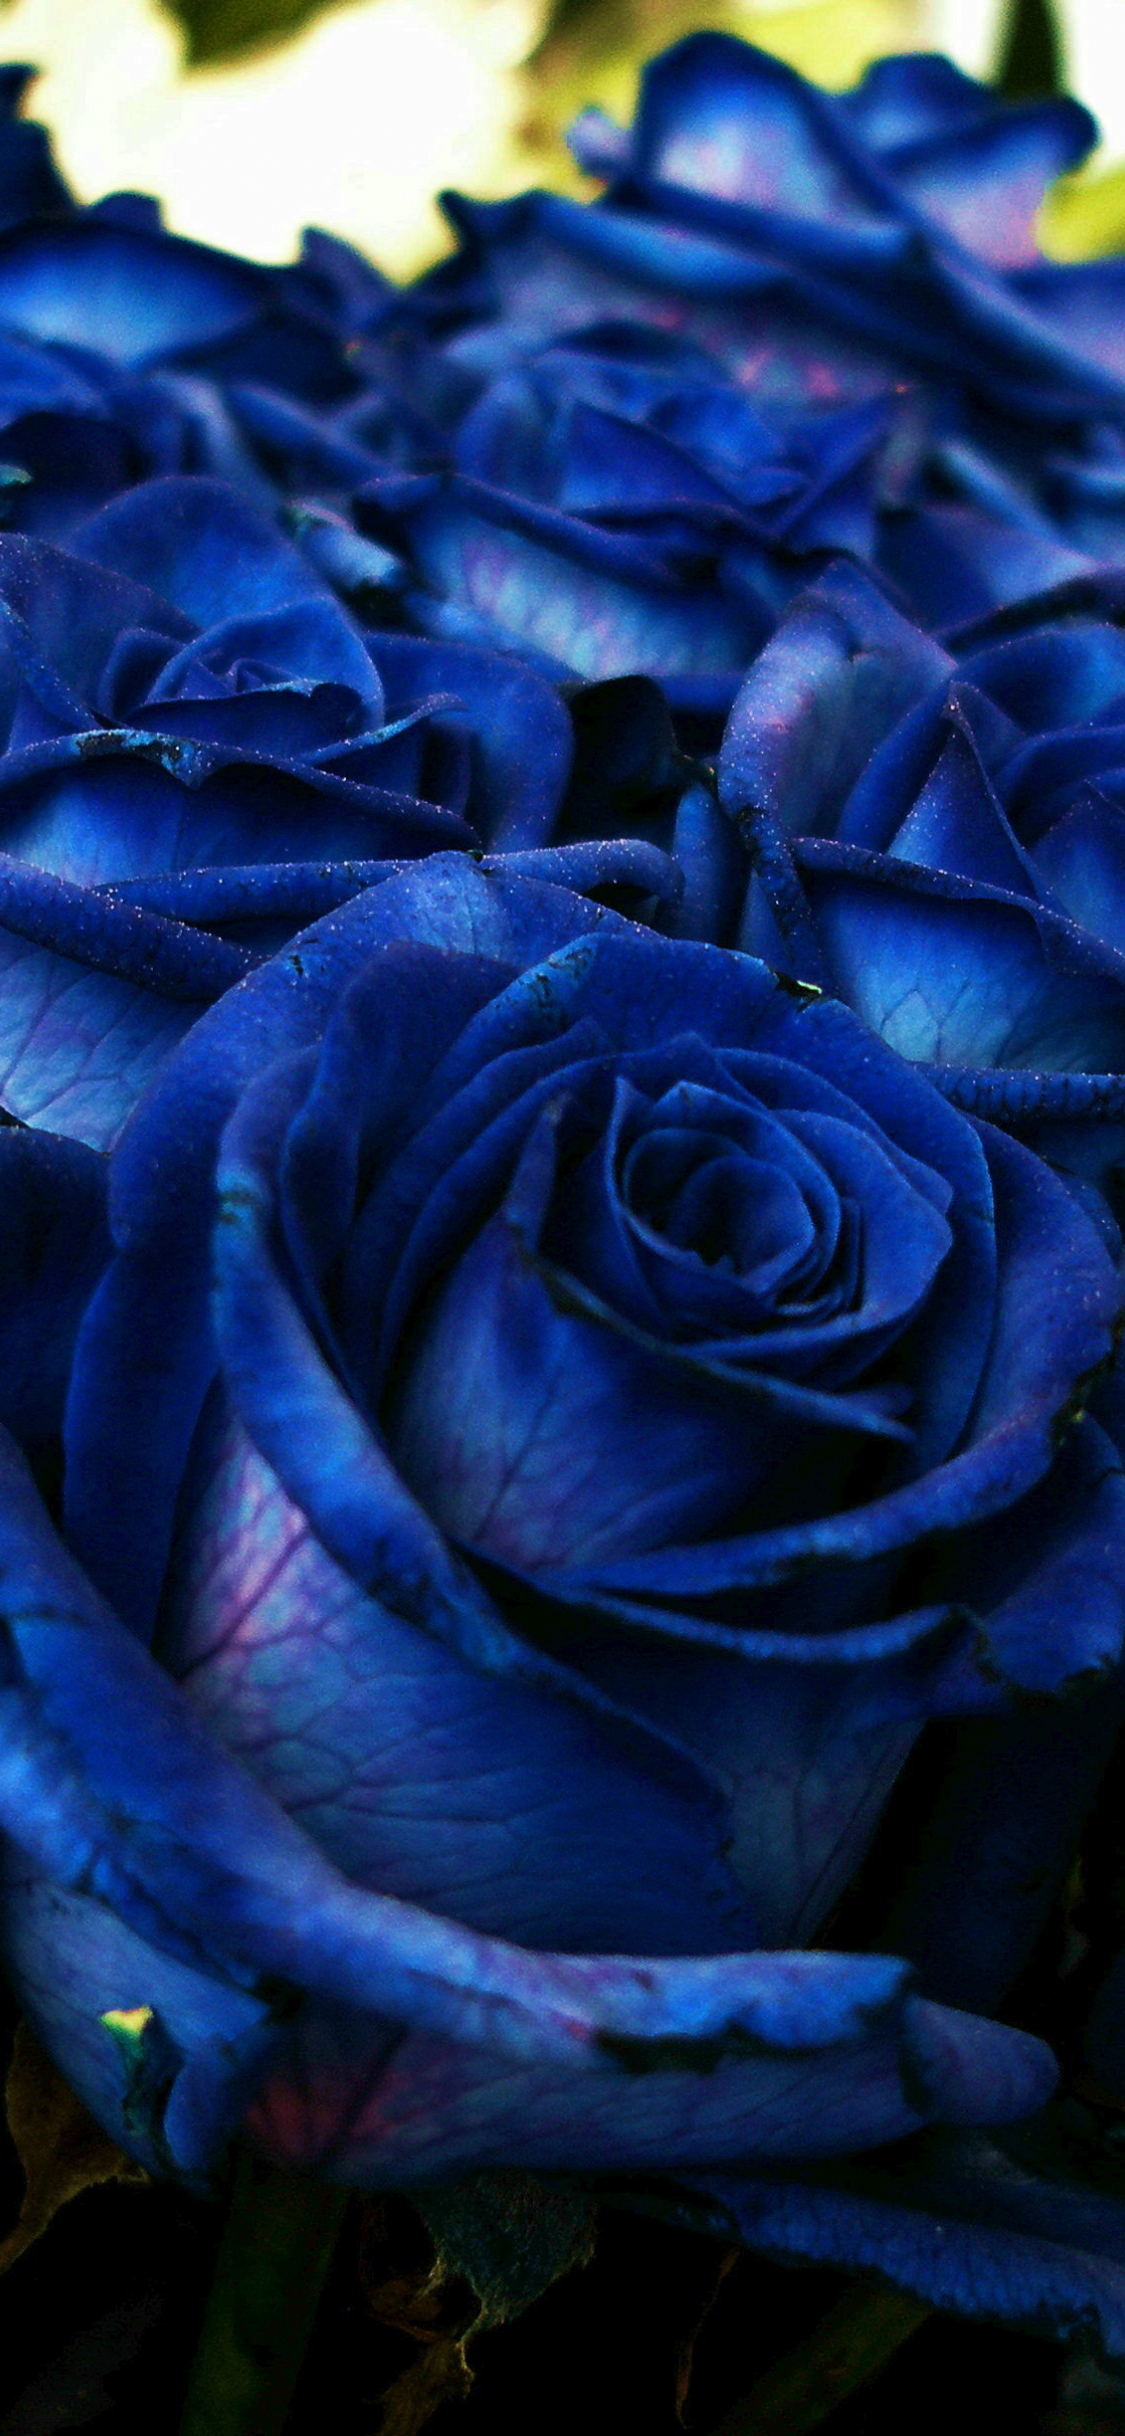 Ideas For Blue Rose Images Hd Wallpaper Download images